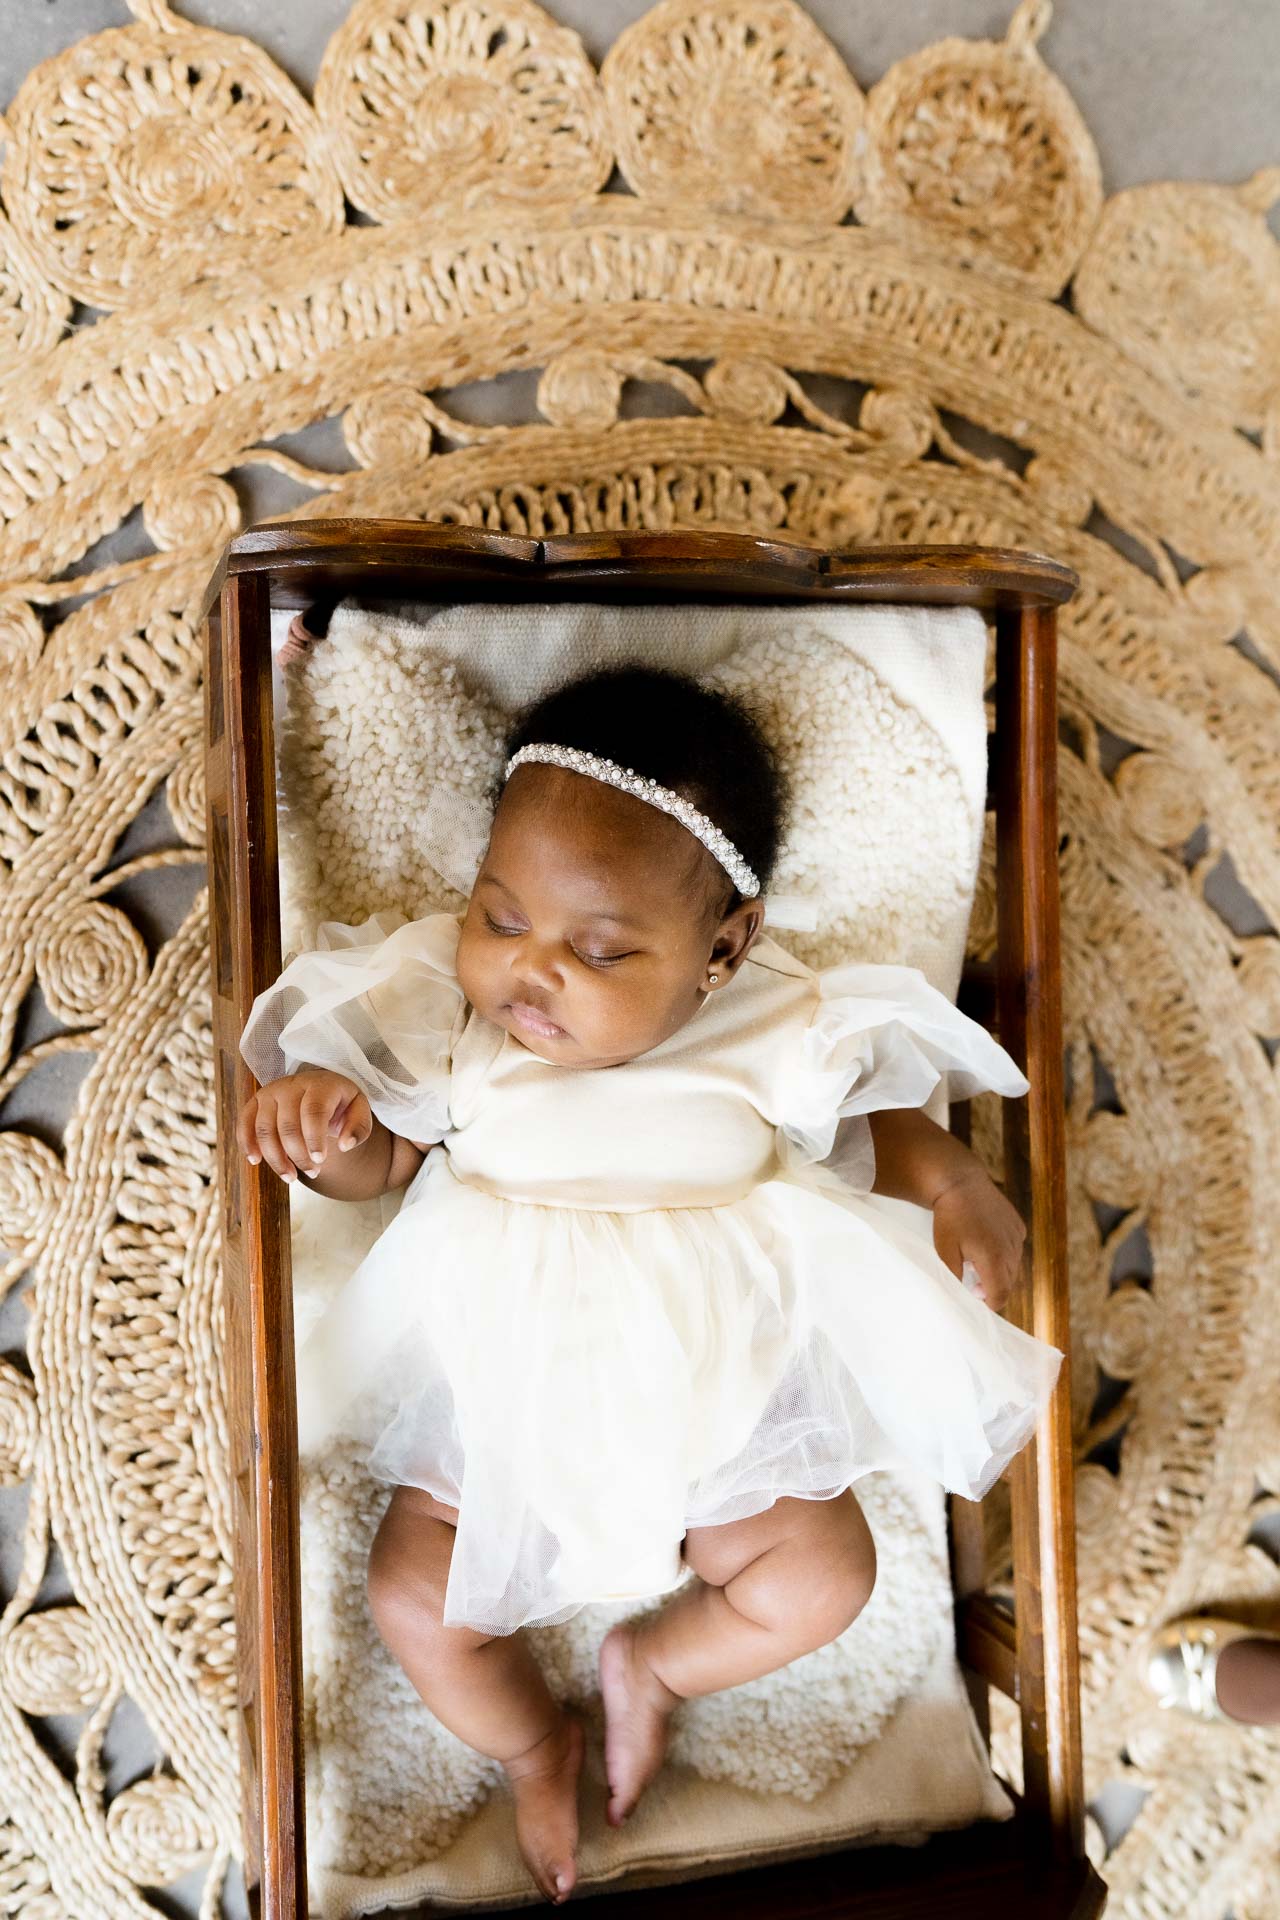 Wiggly baby posed in a wooden crib for newborn photography